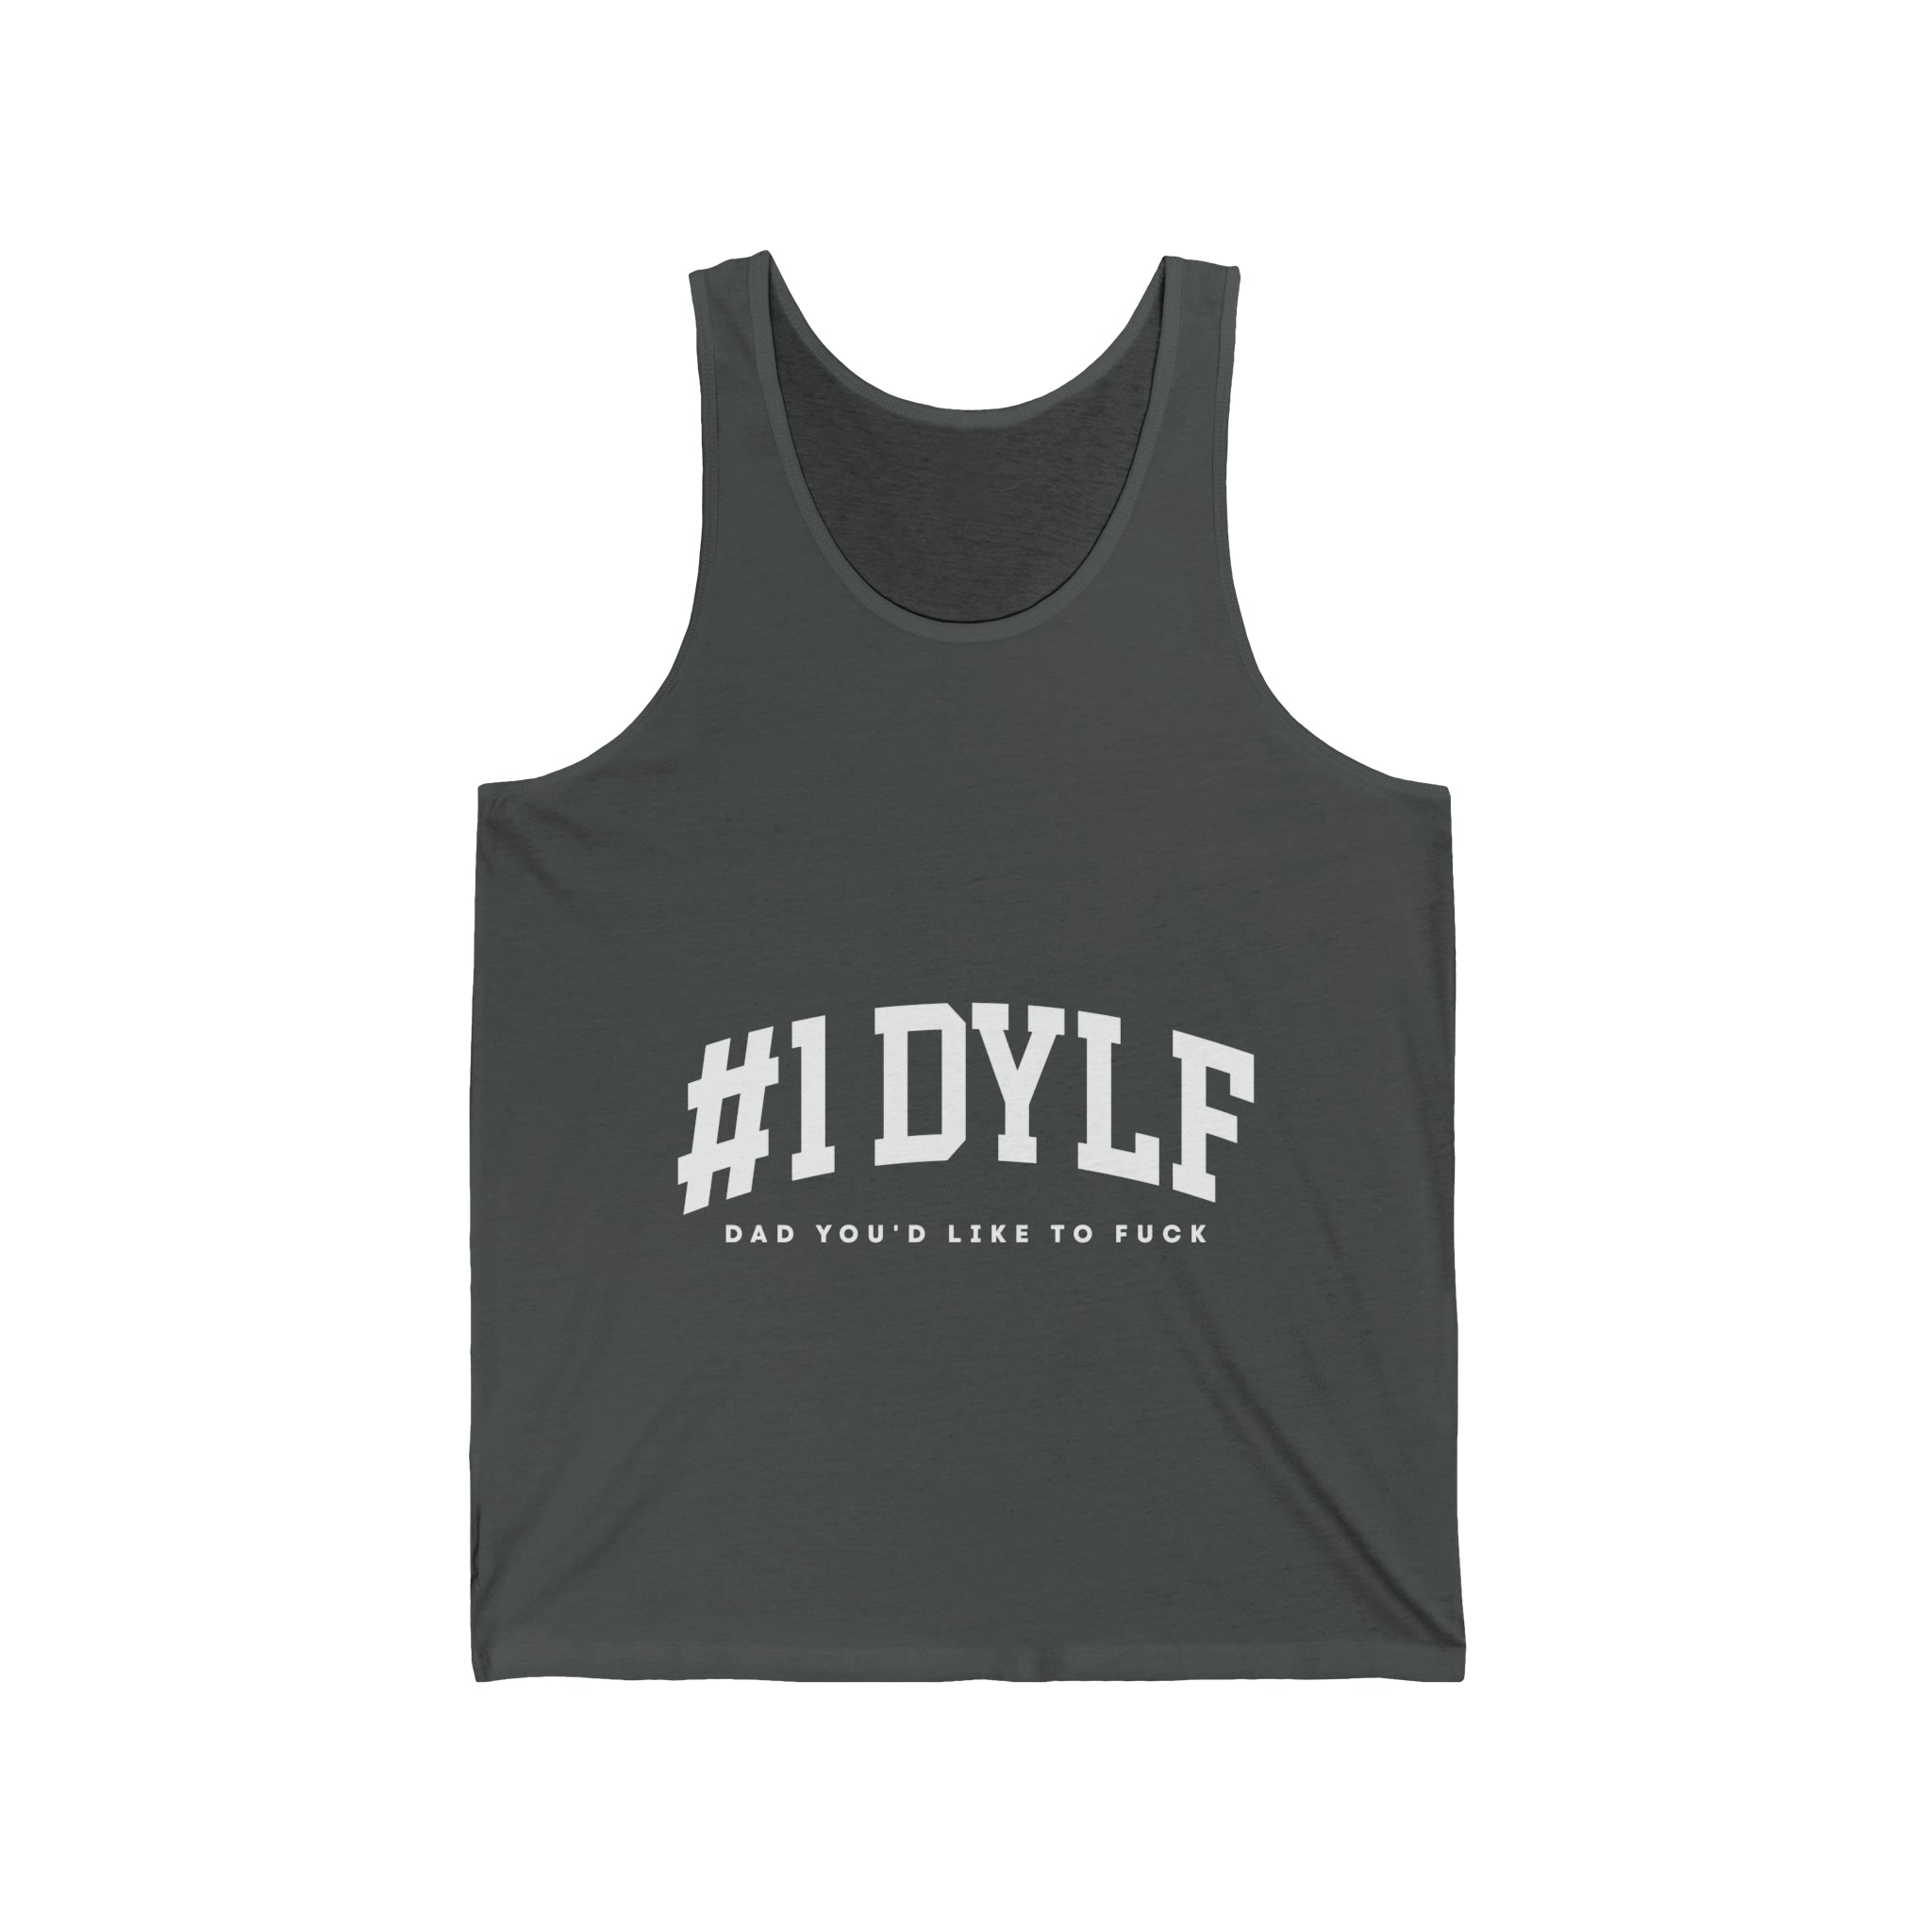 #1 DYLF - Dad You'd Like to Fuck  Unisex Jersey Tank